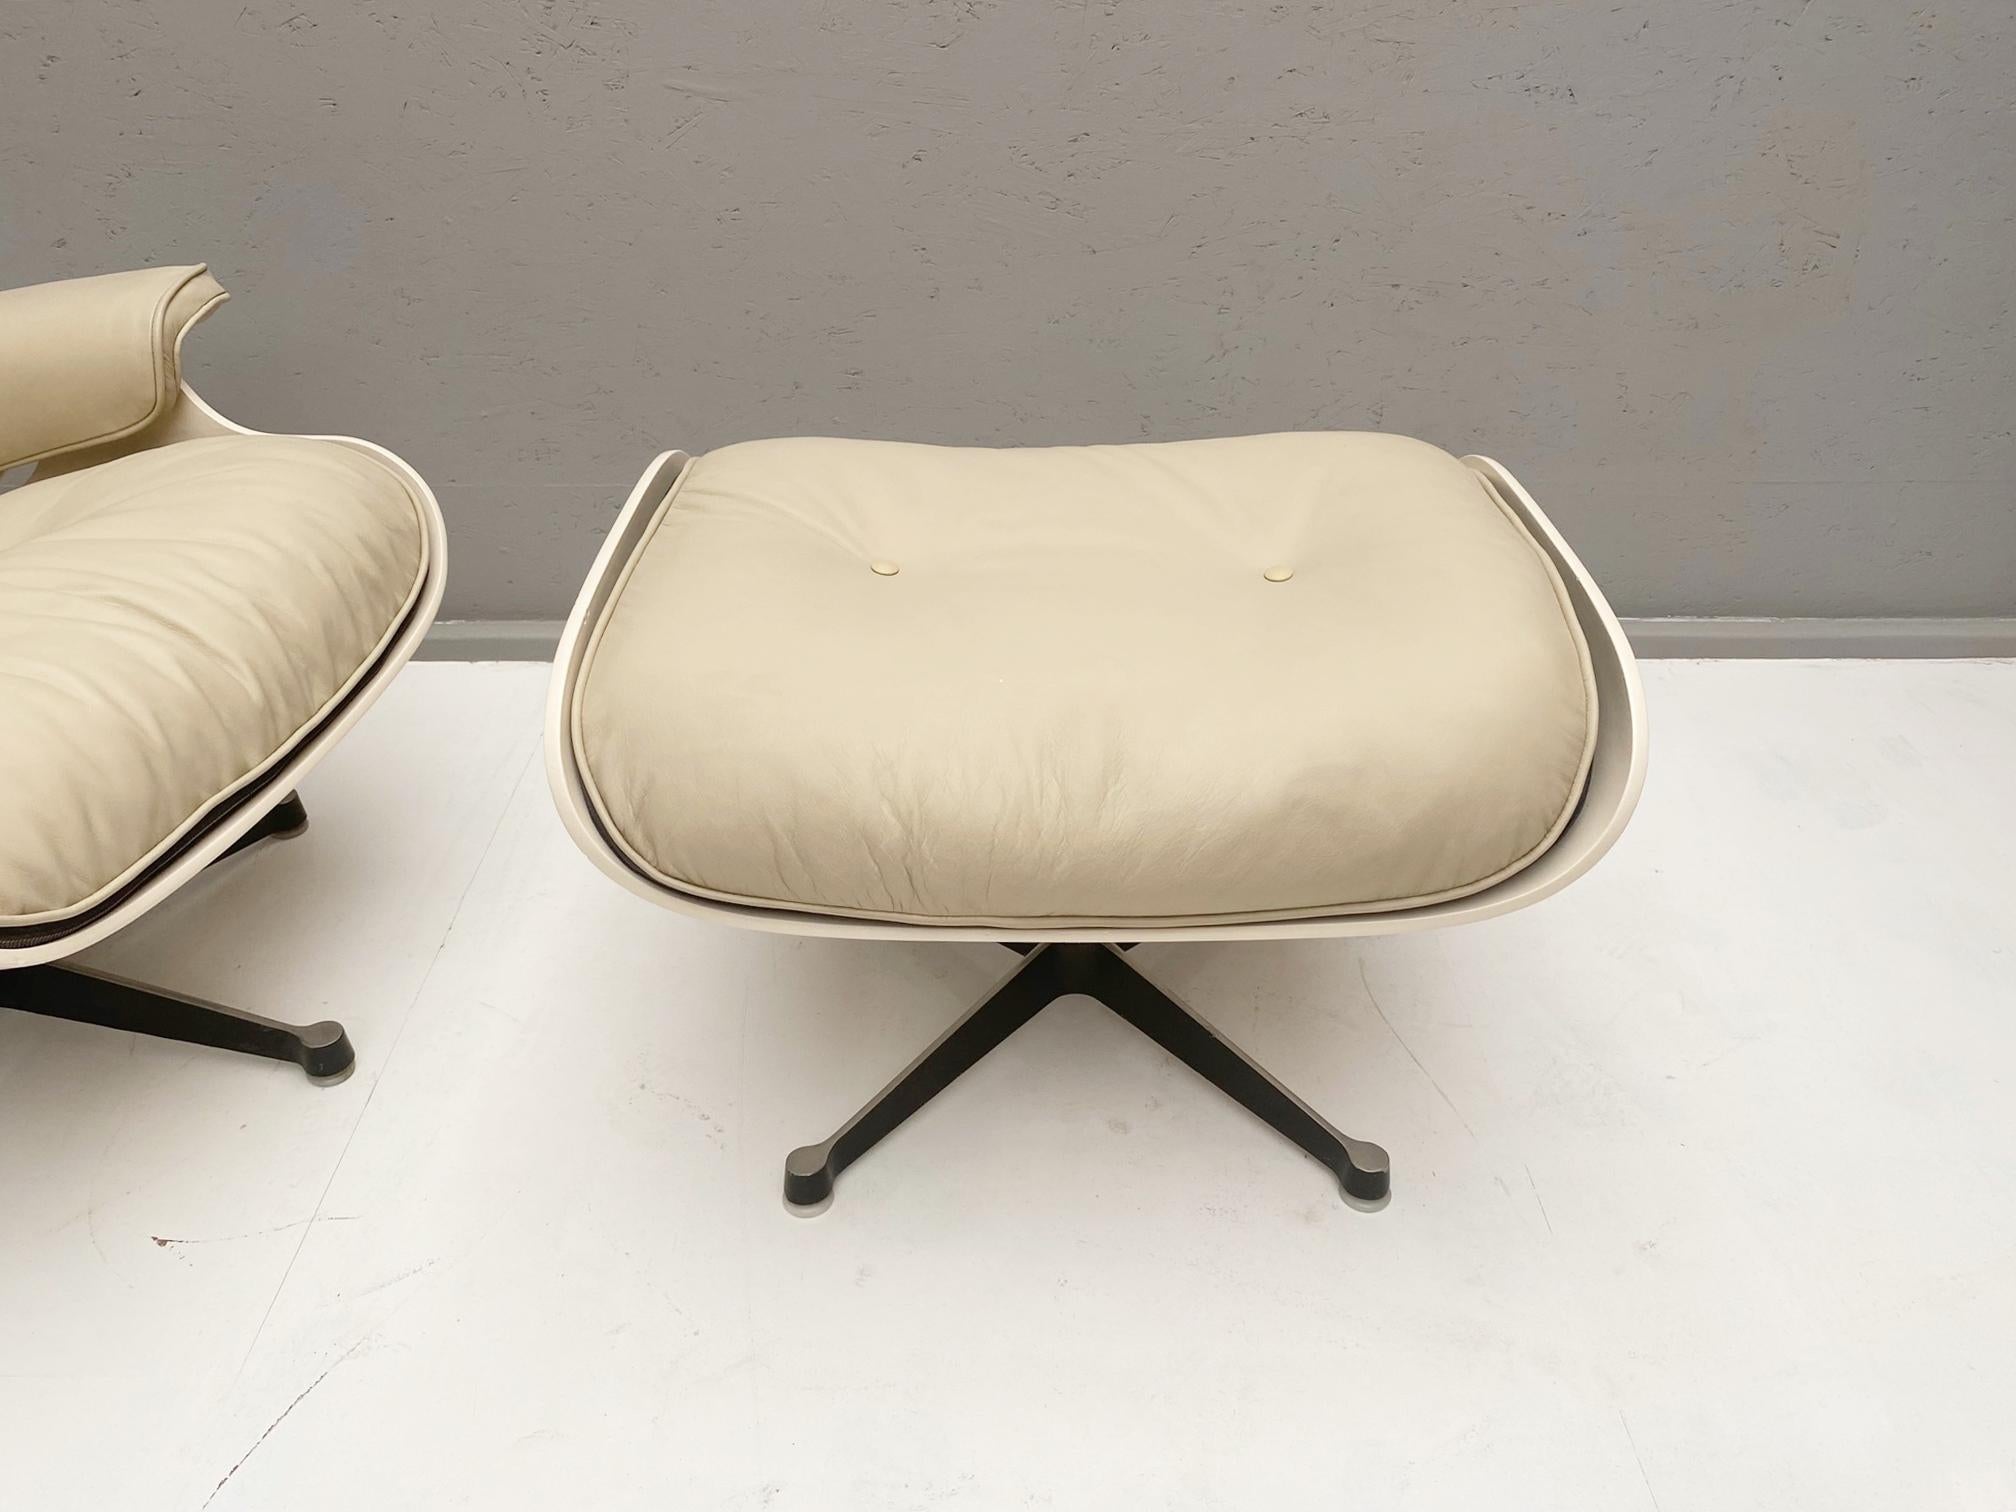 White lounge chair and ottoman in style of Charles and Ray Eames- A pair available.